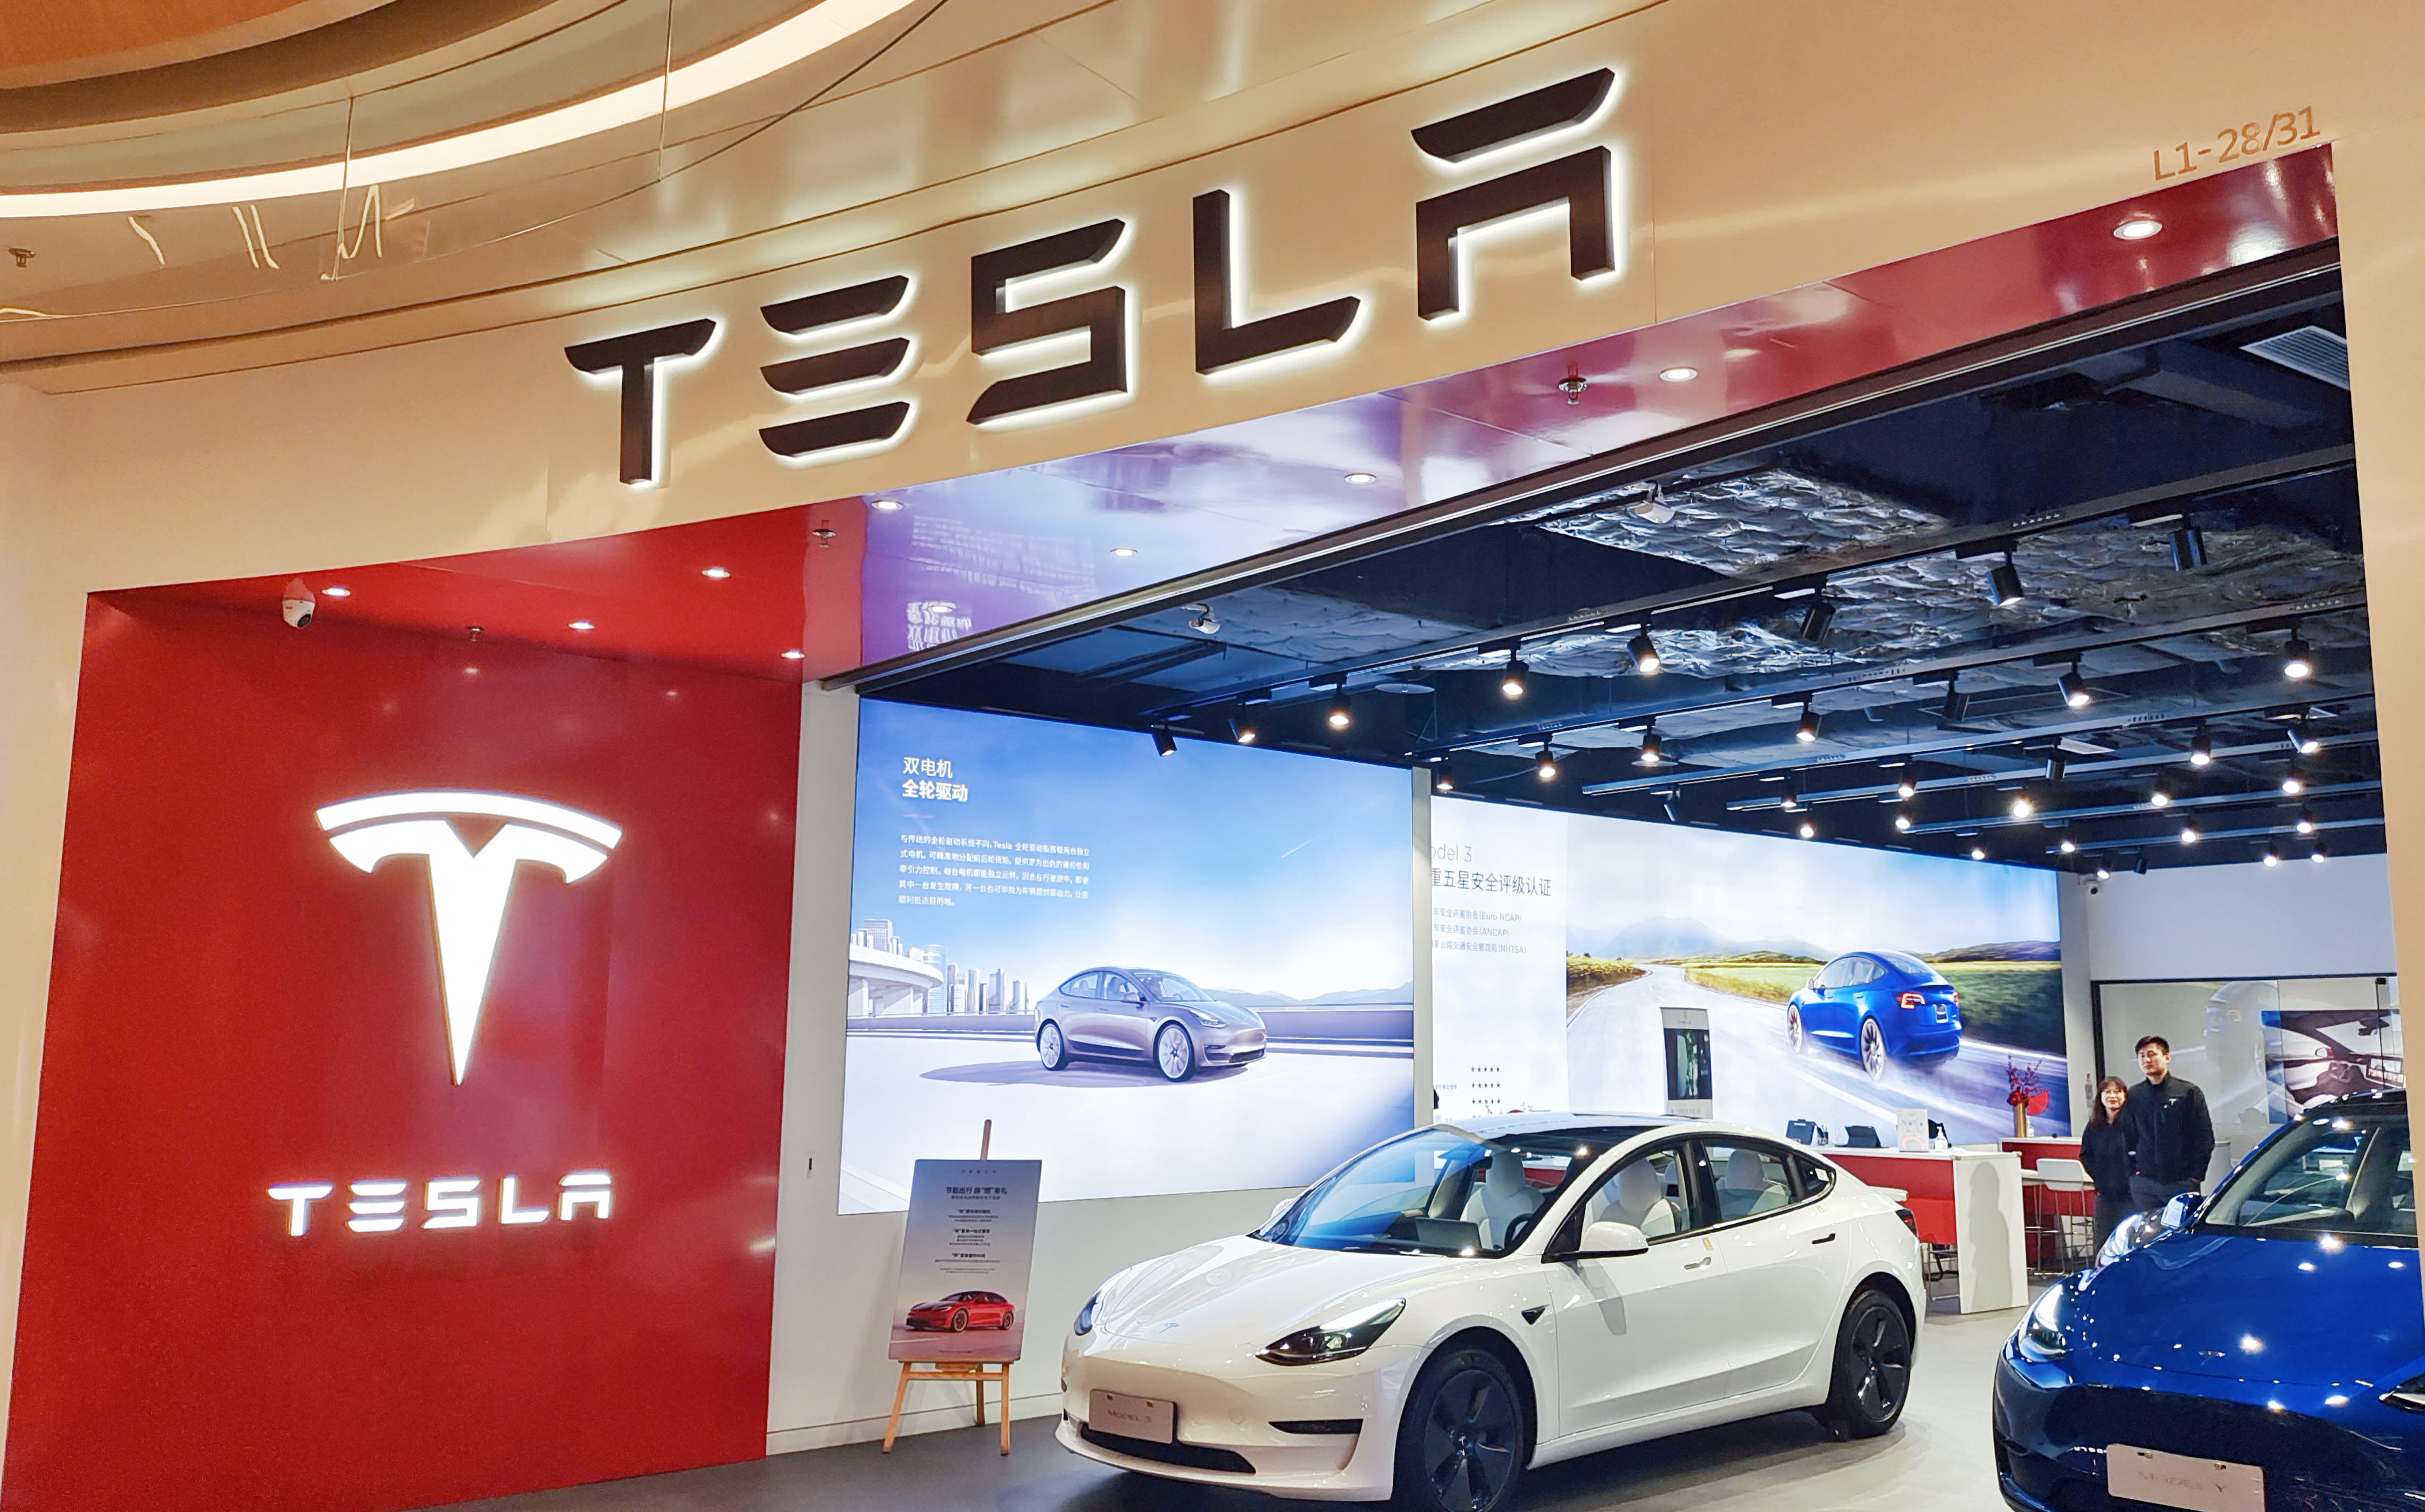 Tesla stock closes down after Twitter deal